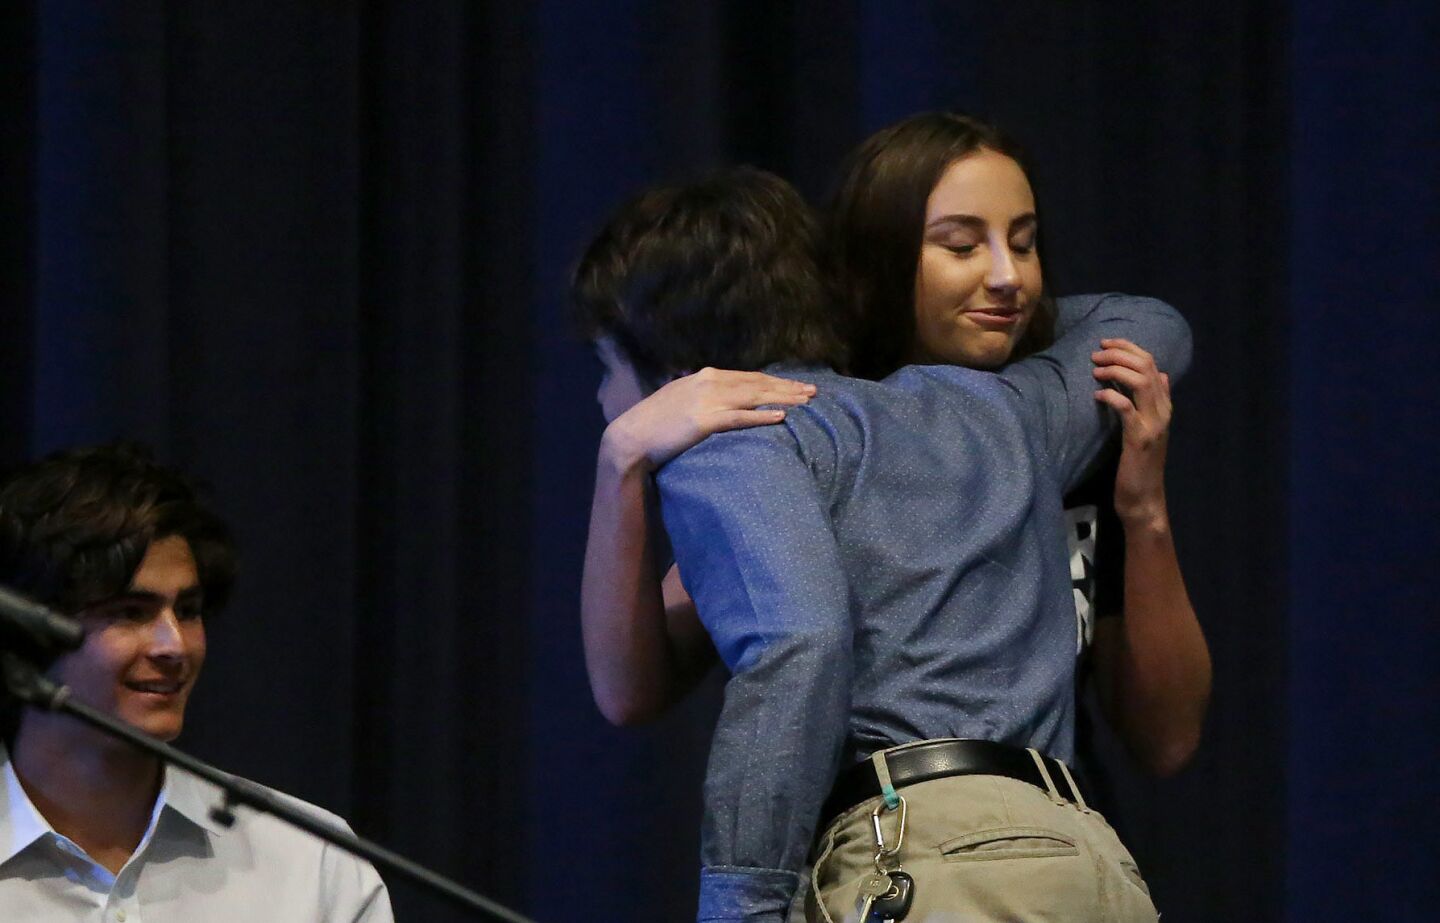 Newport Harbor High School students Gina Leaman and Max Drakeford embrace after she spoke at Monday's town hall-style meeting at the school.